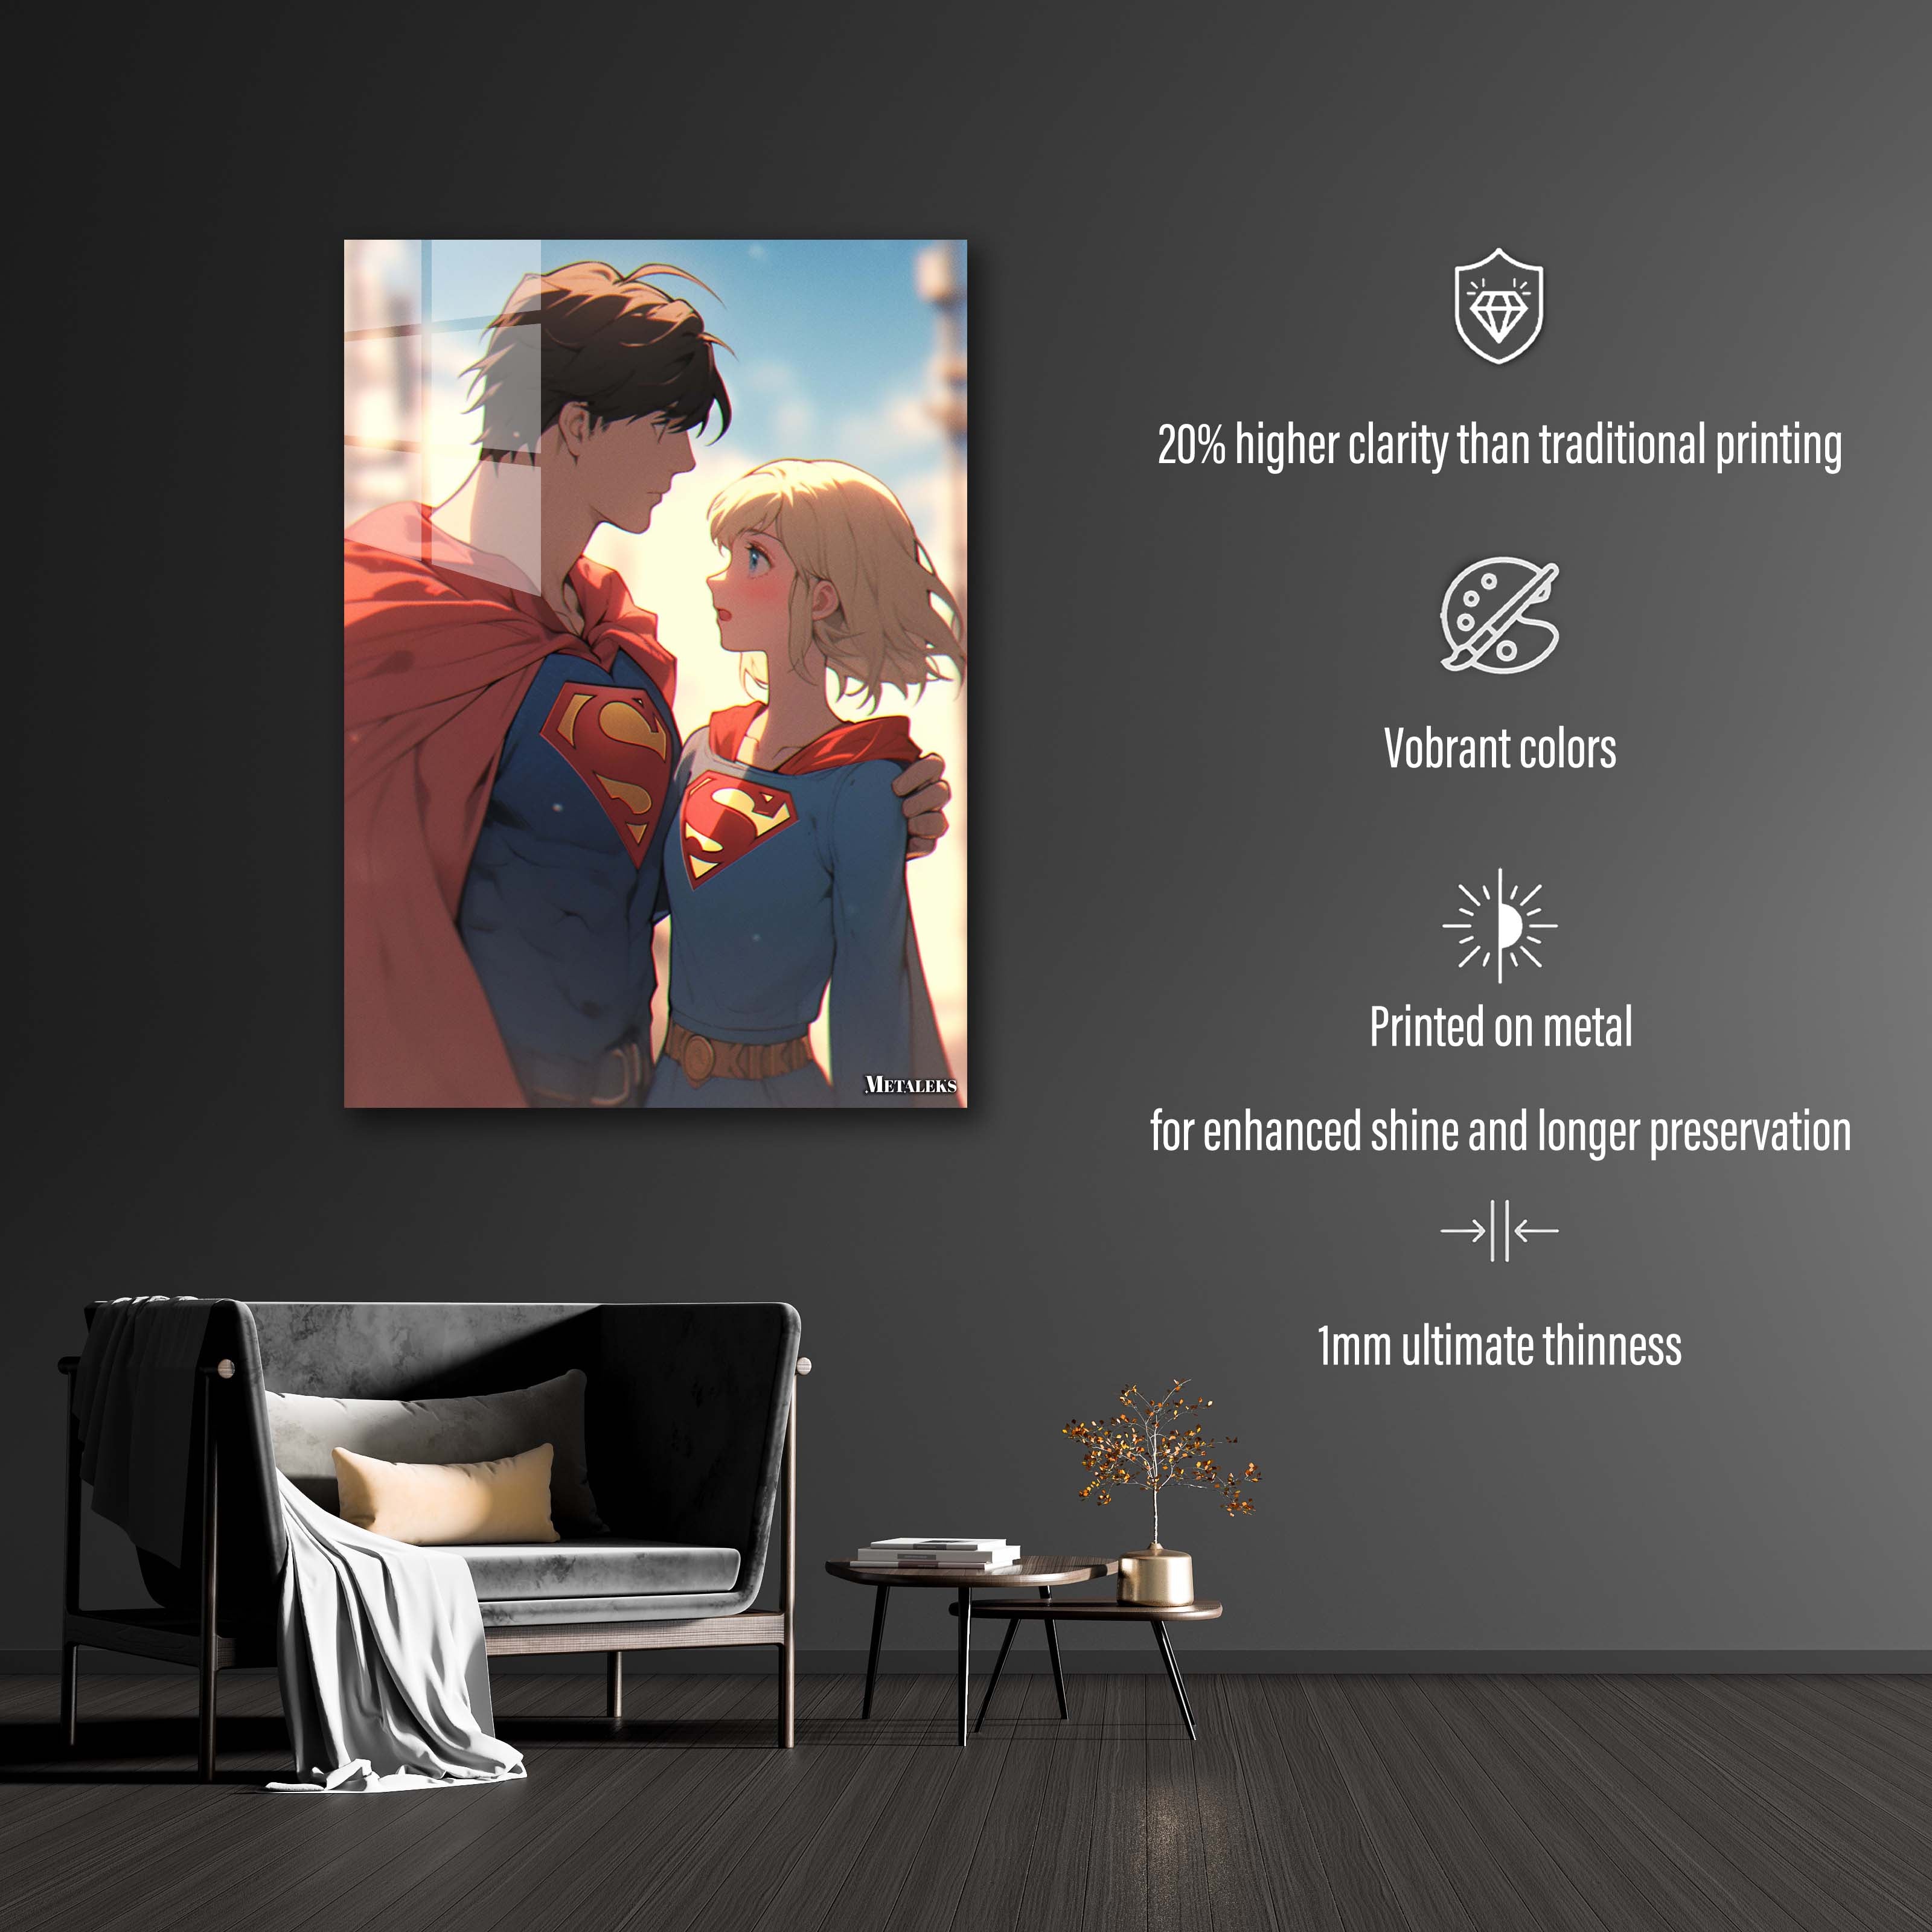 Krypton's Legacy_ Superman and Supergirl's Lasting Bond-designed by @theanimecrossover